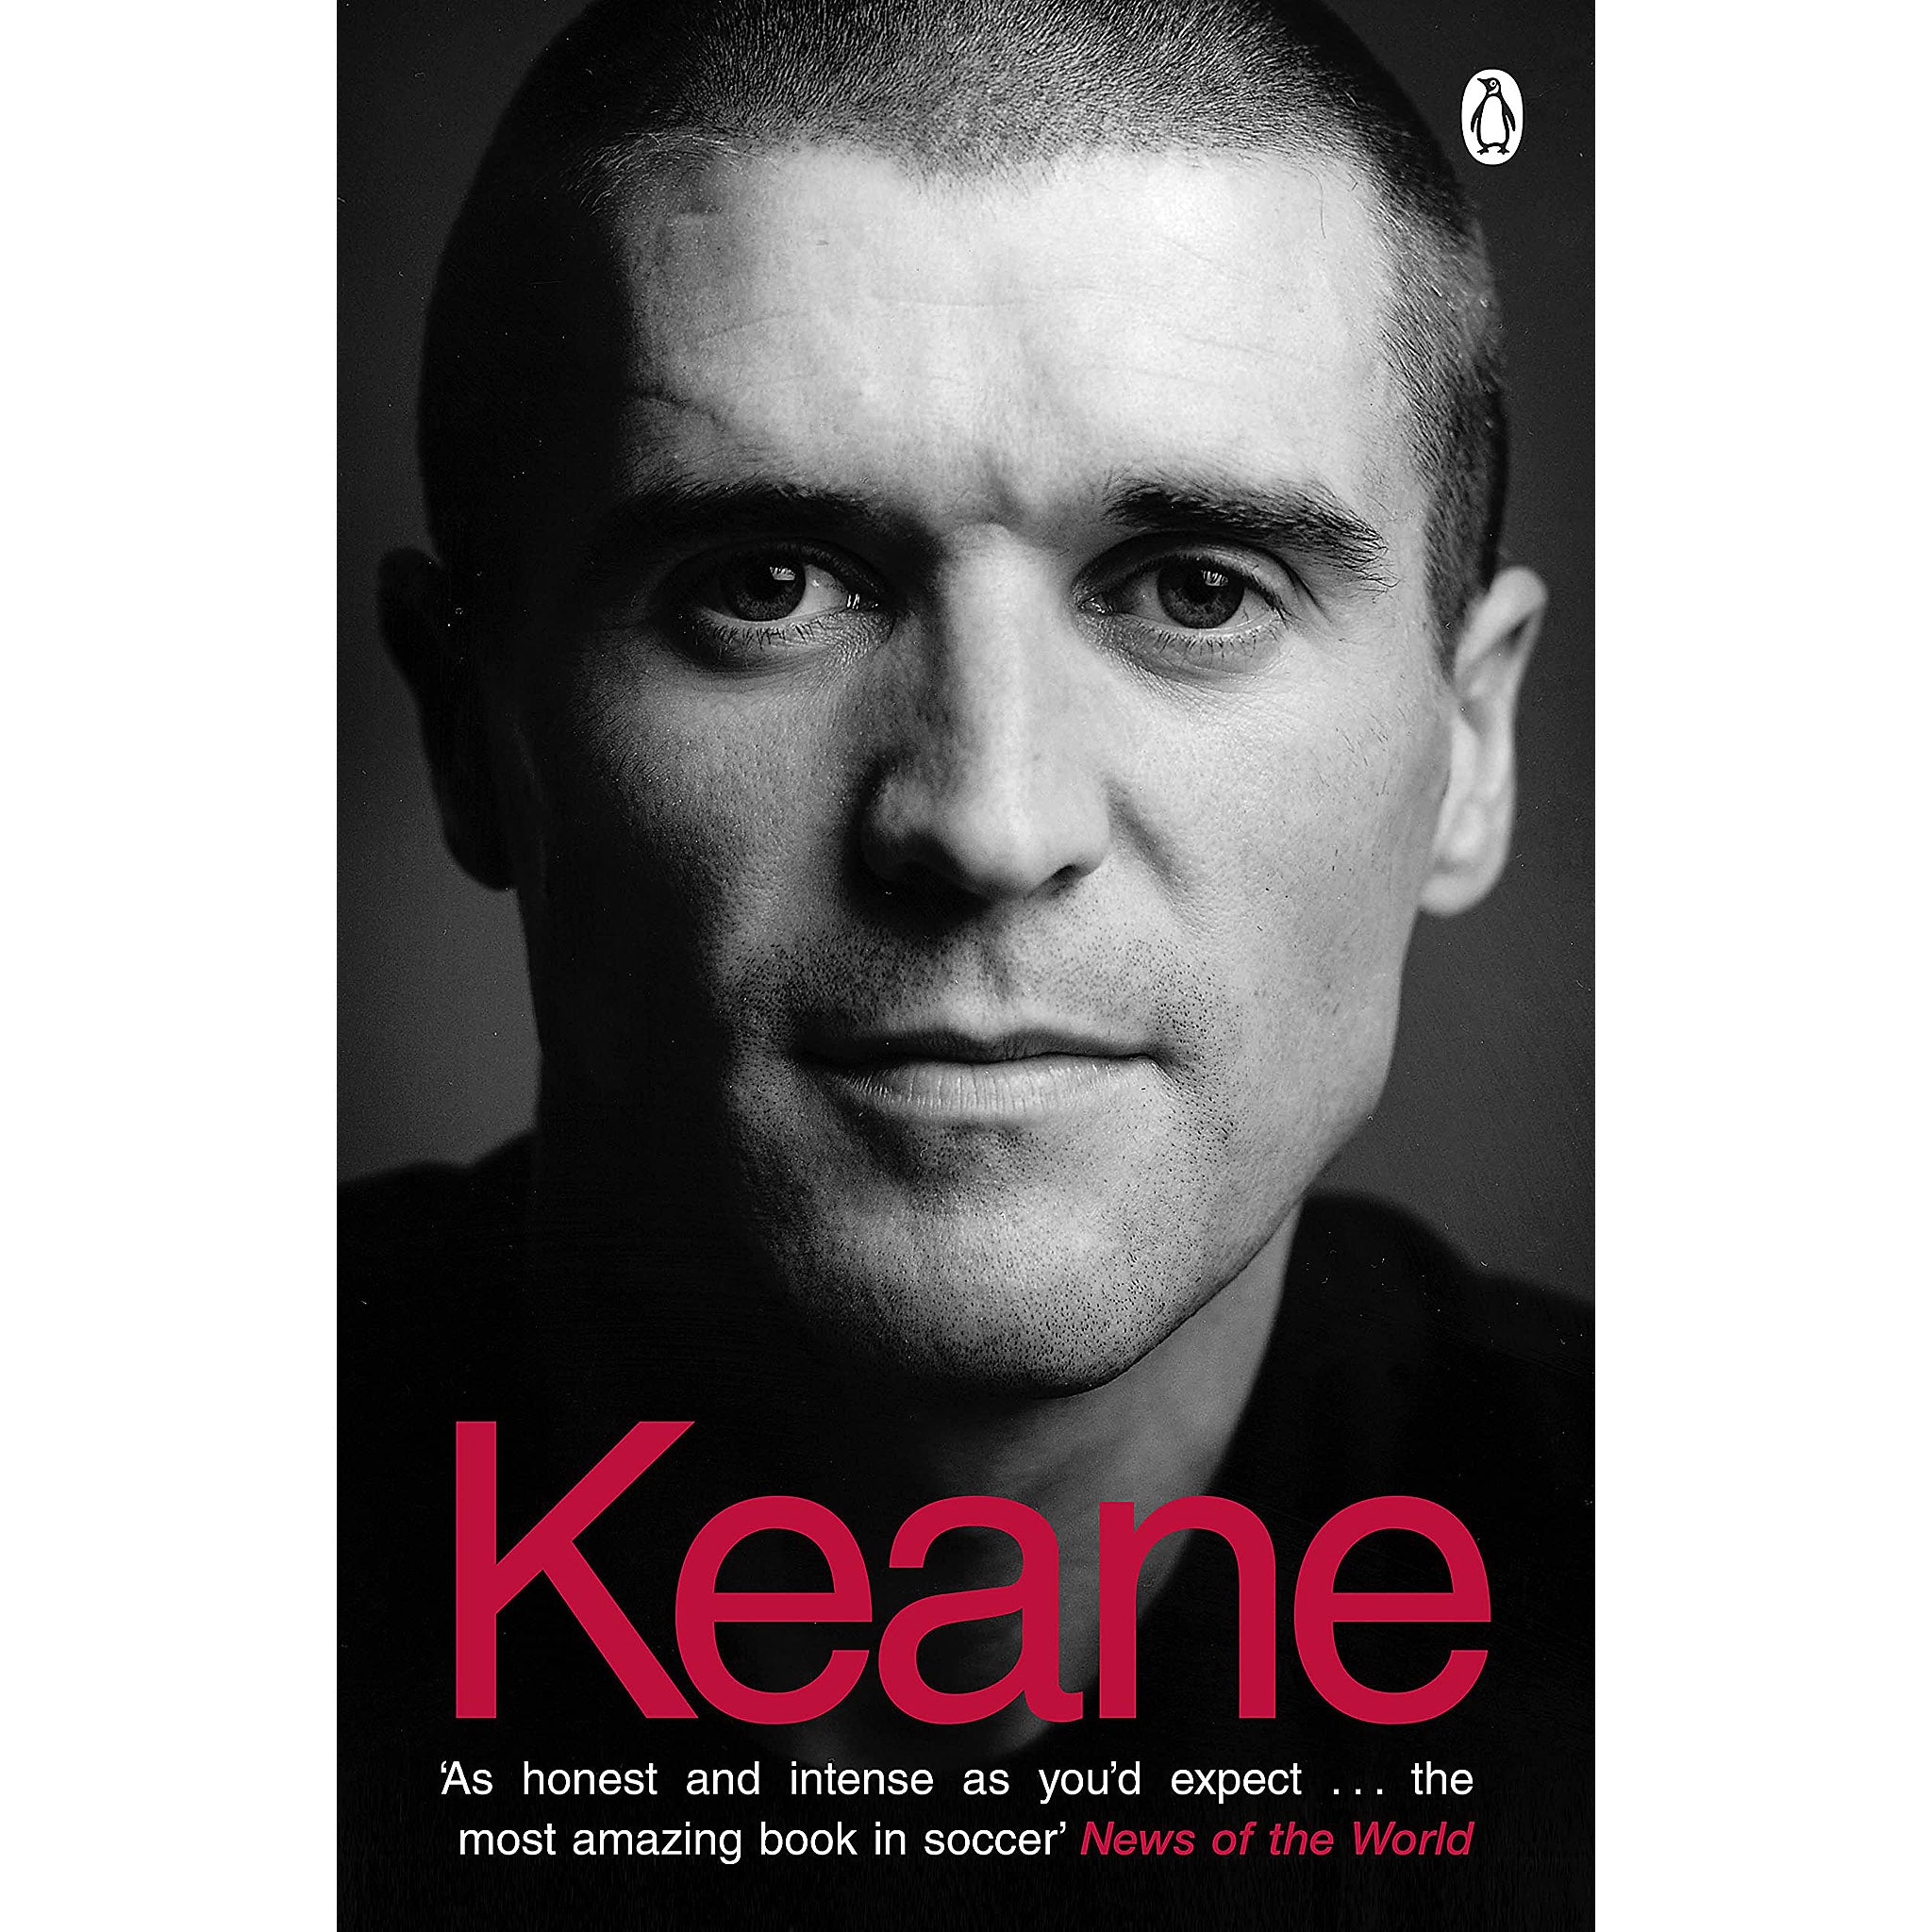 Keane – The Autobiography